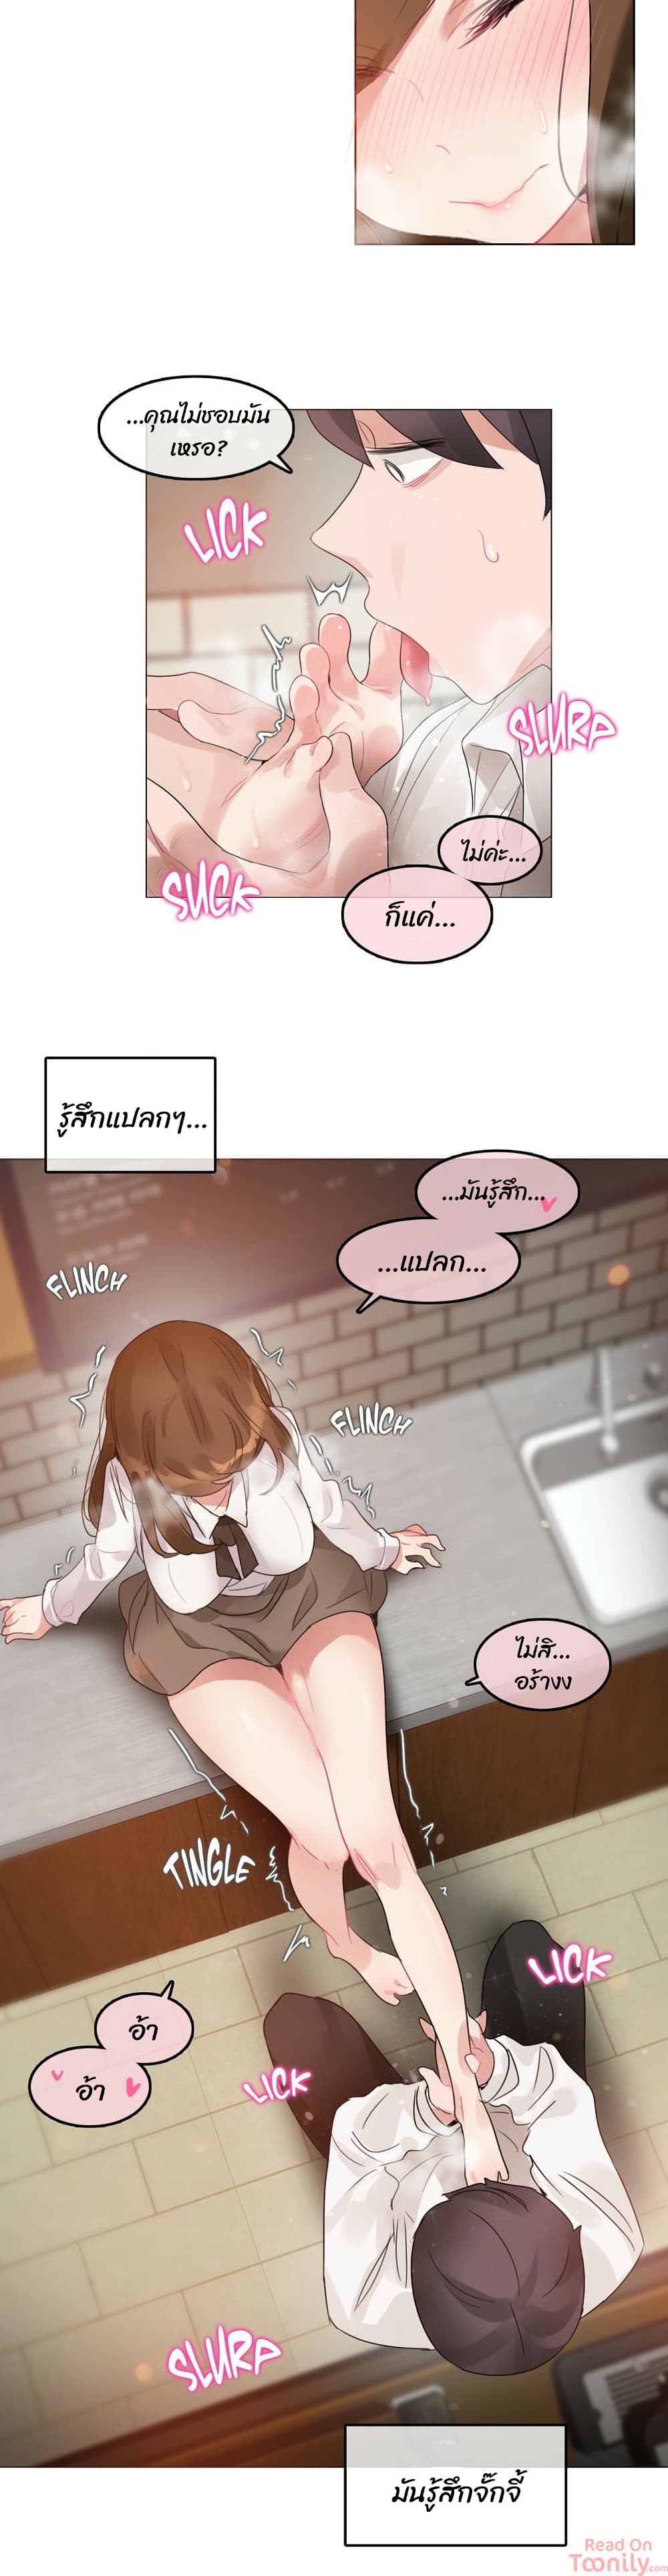 A Pervert's Daily Life 85 (10)